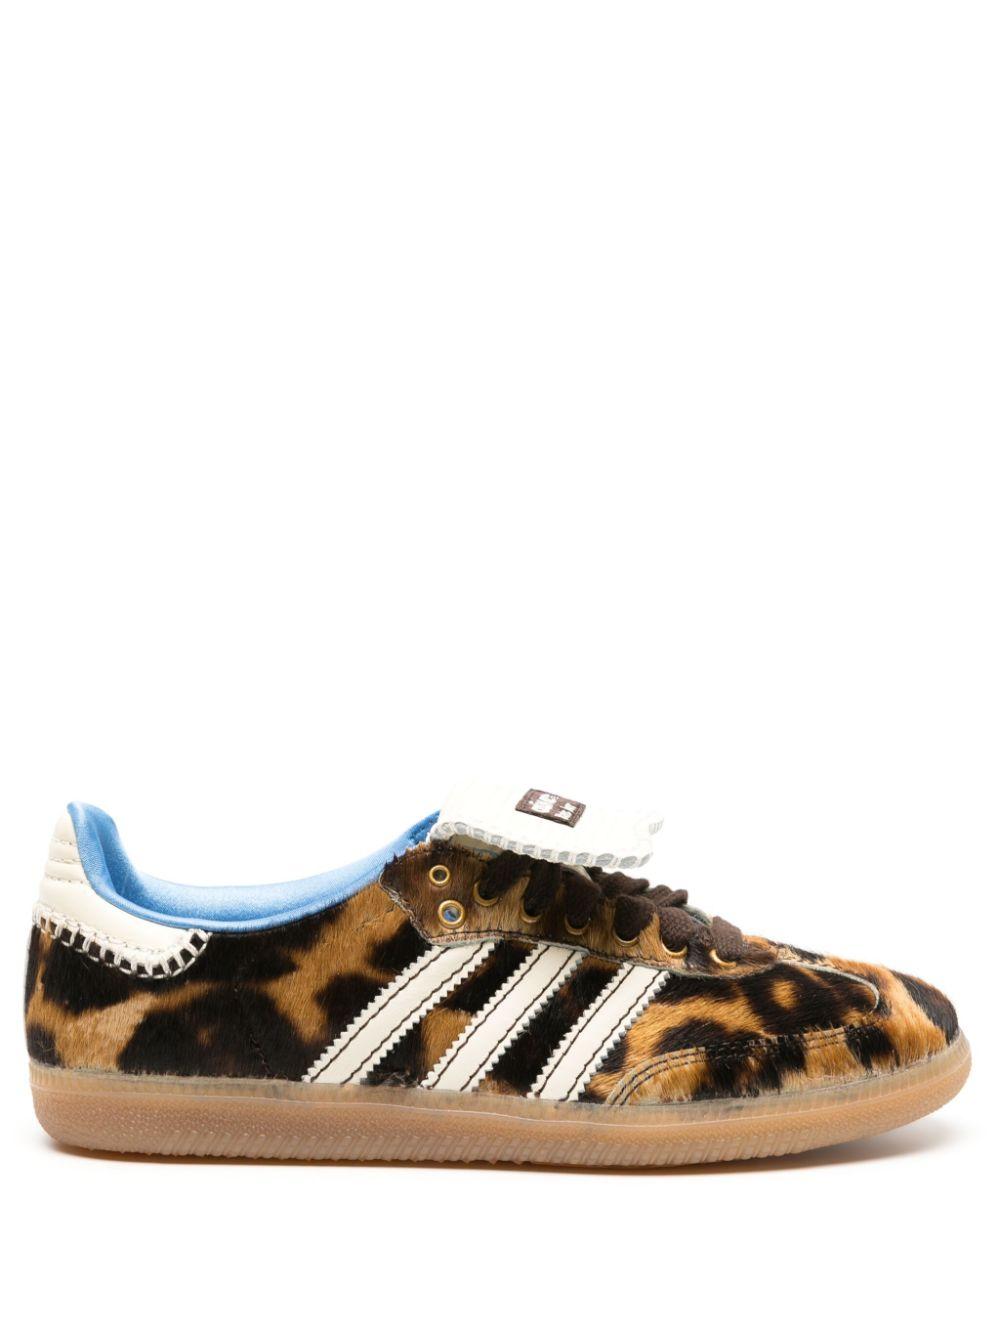 adidas Leopard-print Leather Sneakers in Brown | Lyst